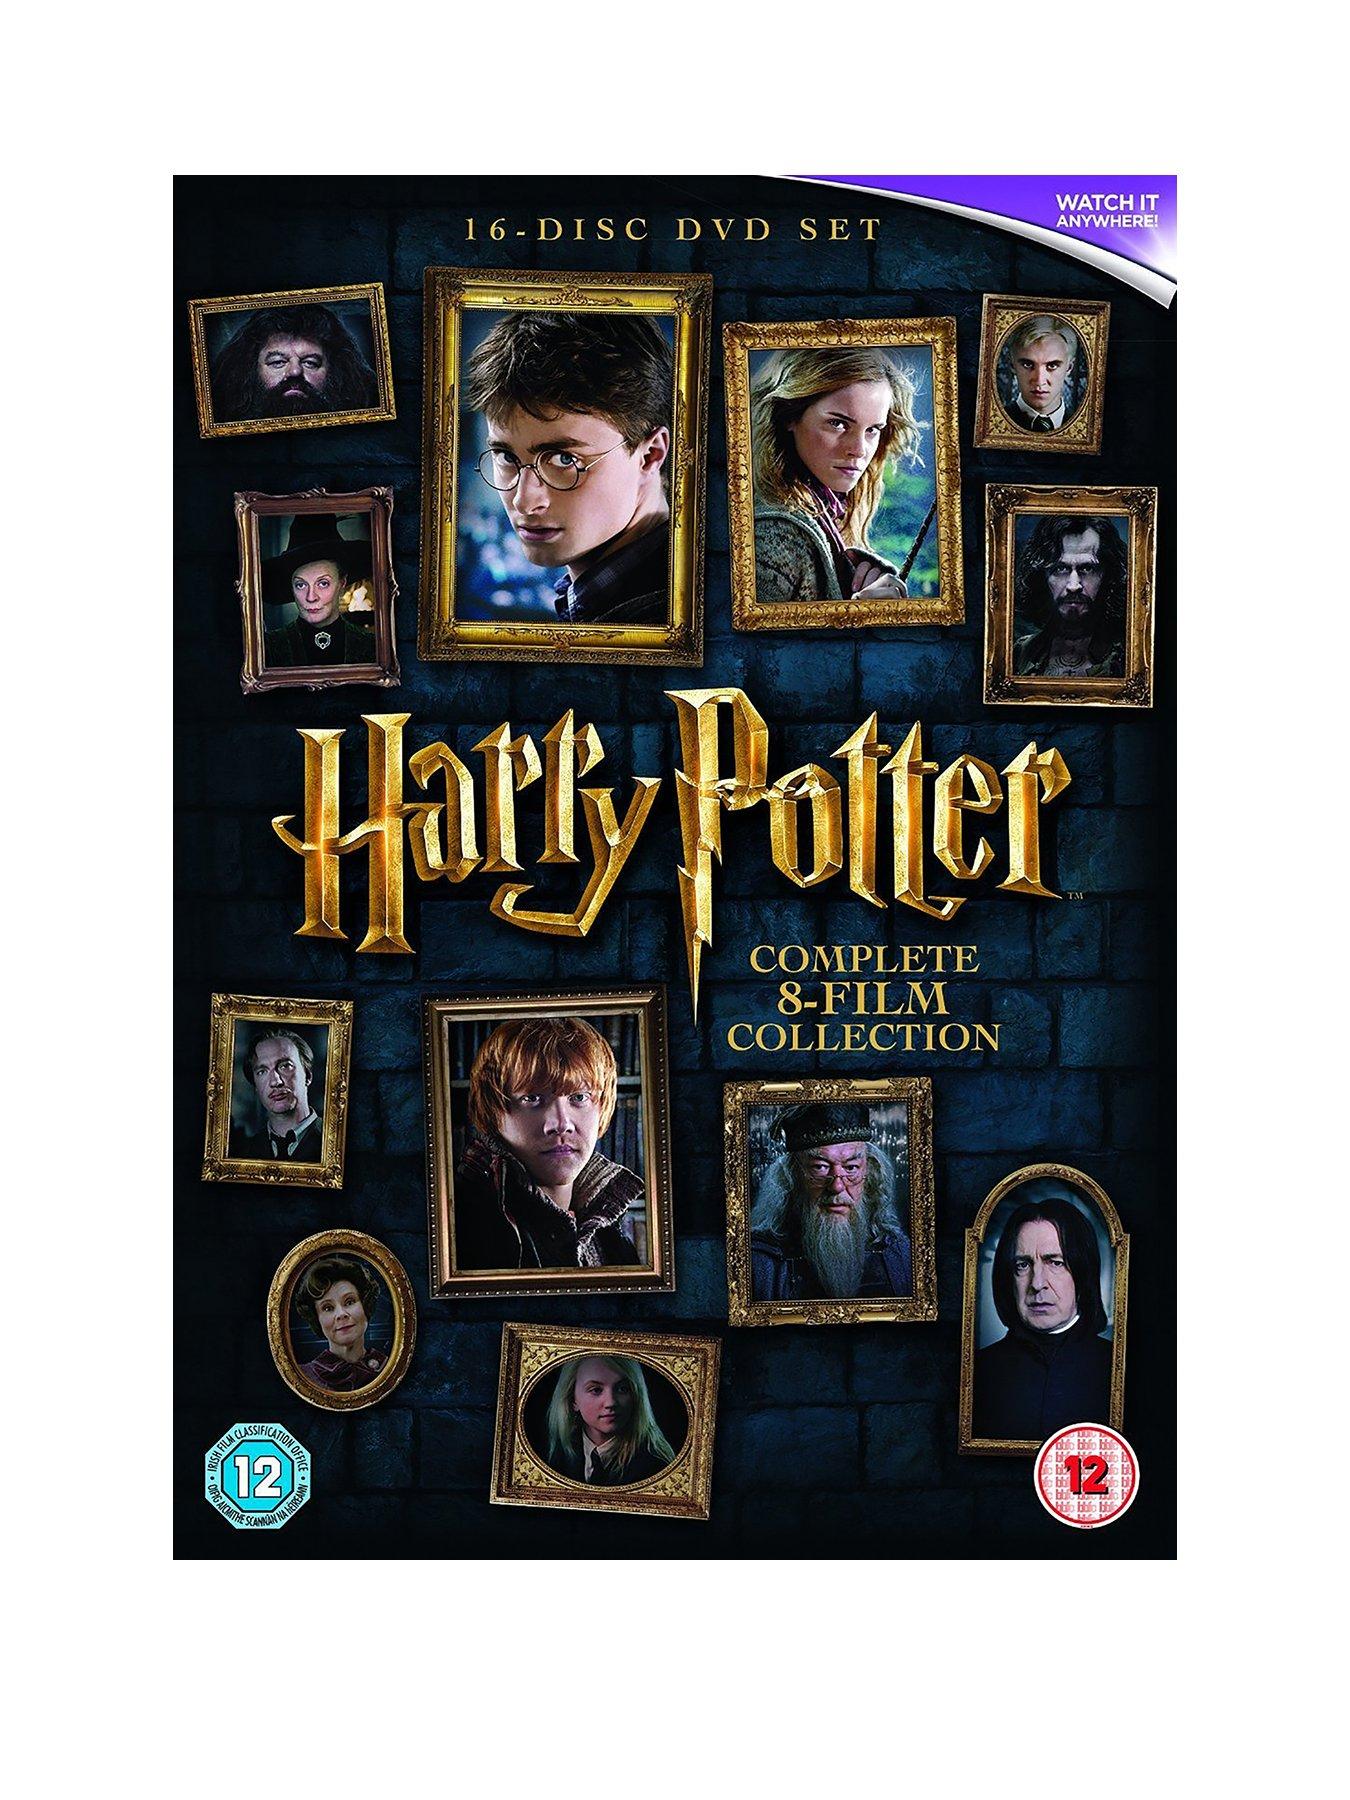 Harry Potter DVDs and Movie Boxed Sets